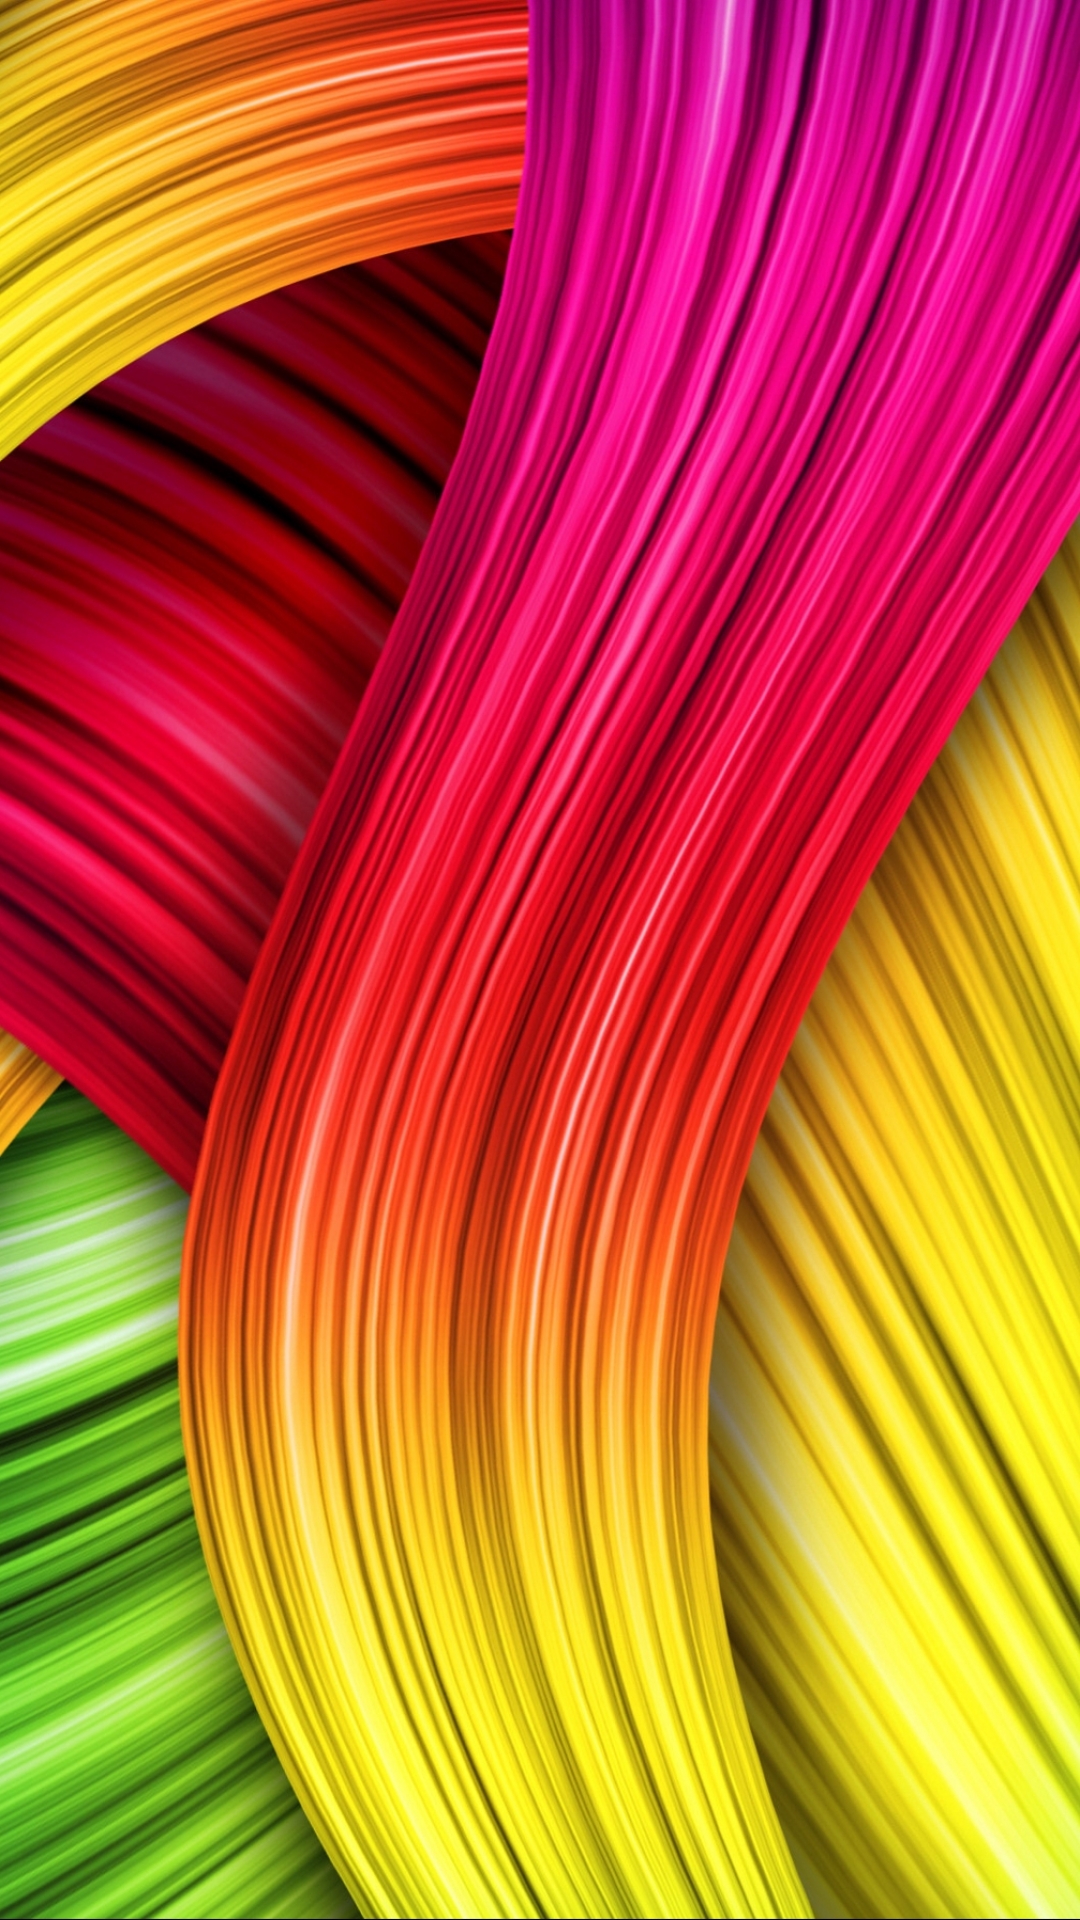 latest new wallpaper for mobile,green,red,yellow,magenta,orange